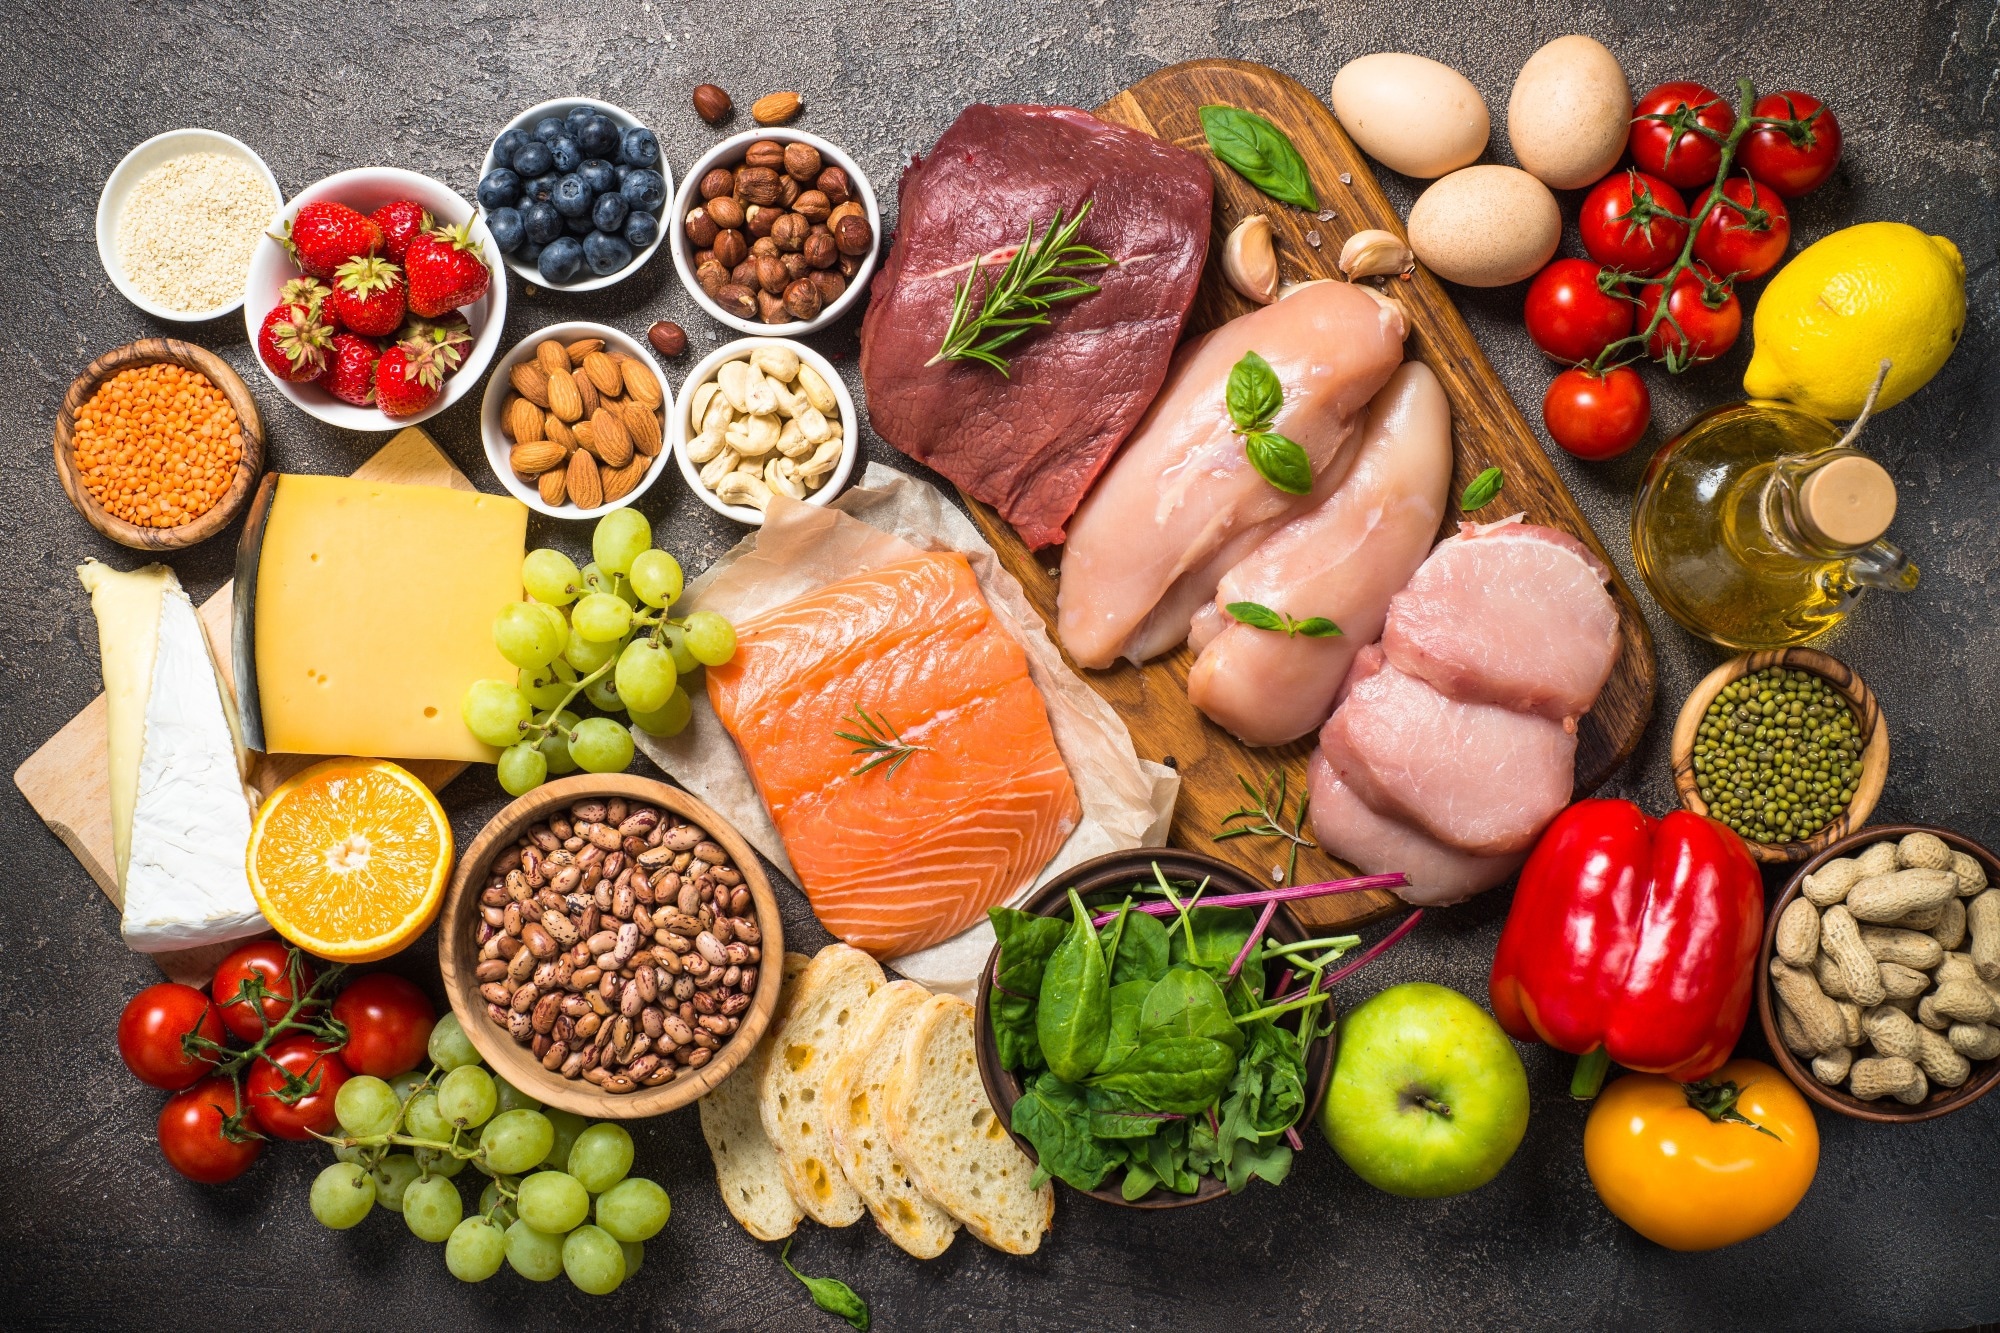 Study: Ketogenic diet enhances the effects of oxycodone in mice. Image Credit: nadianb / Shutterstock